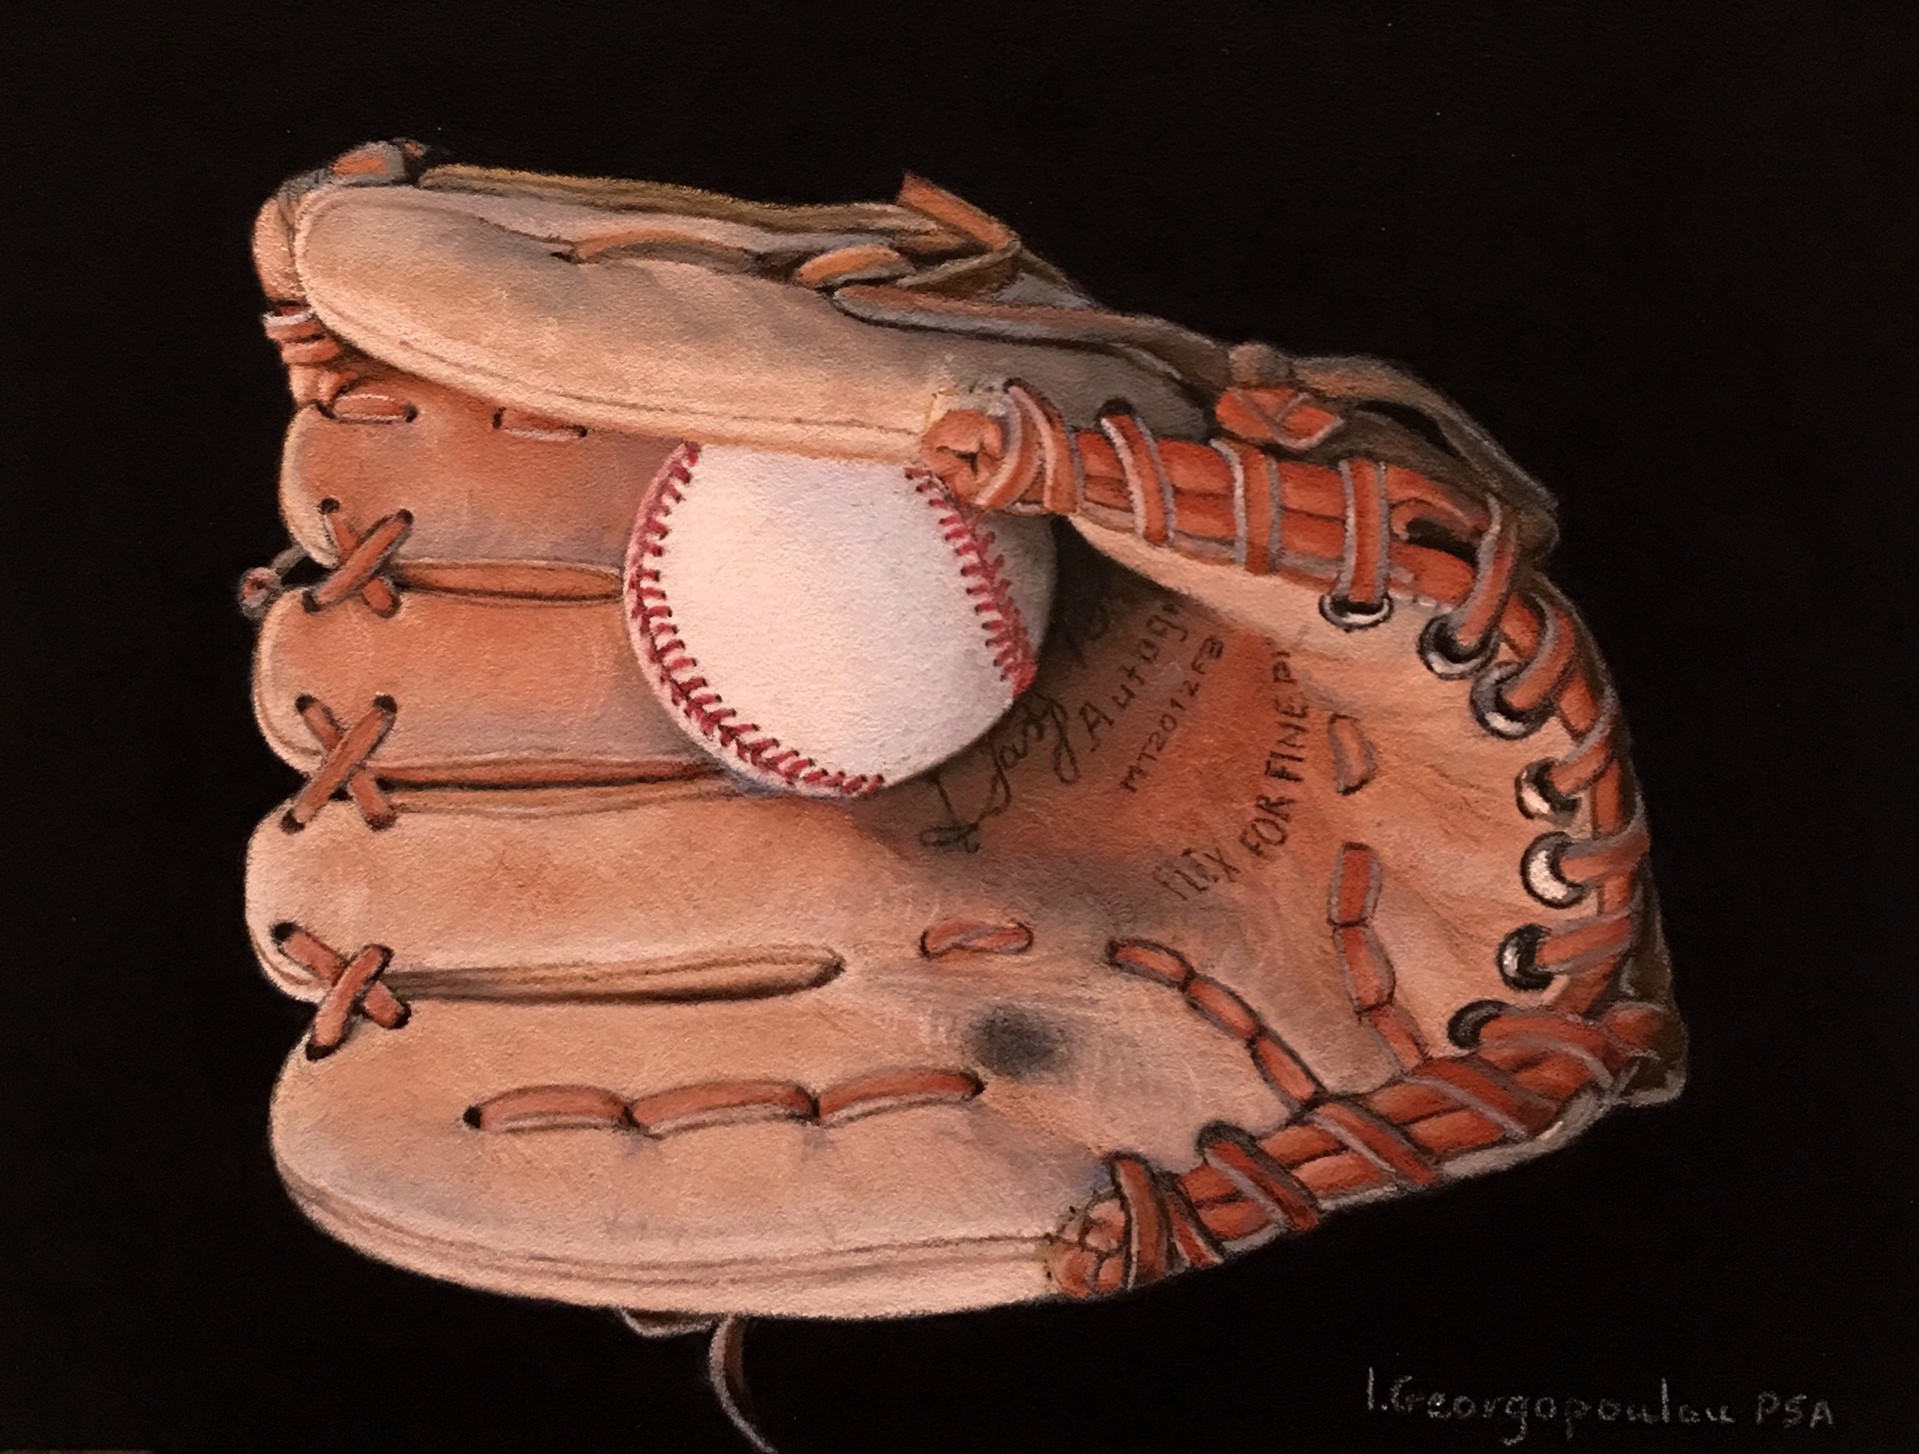 Old Glove and Ball by Irene Georgopoulou